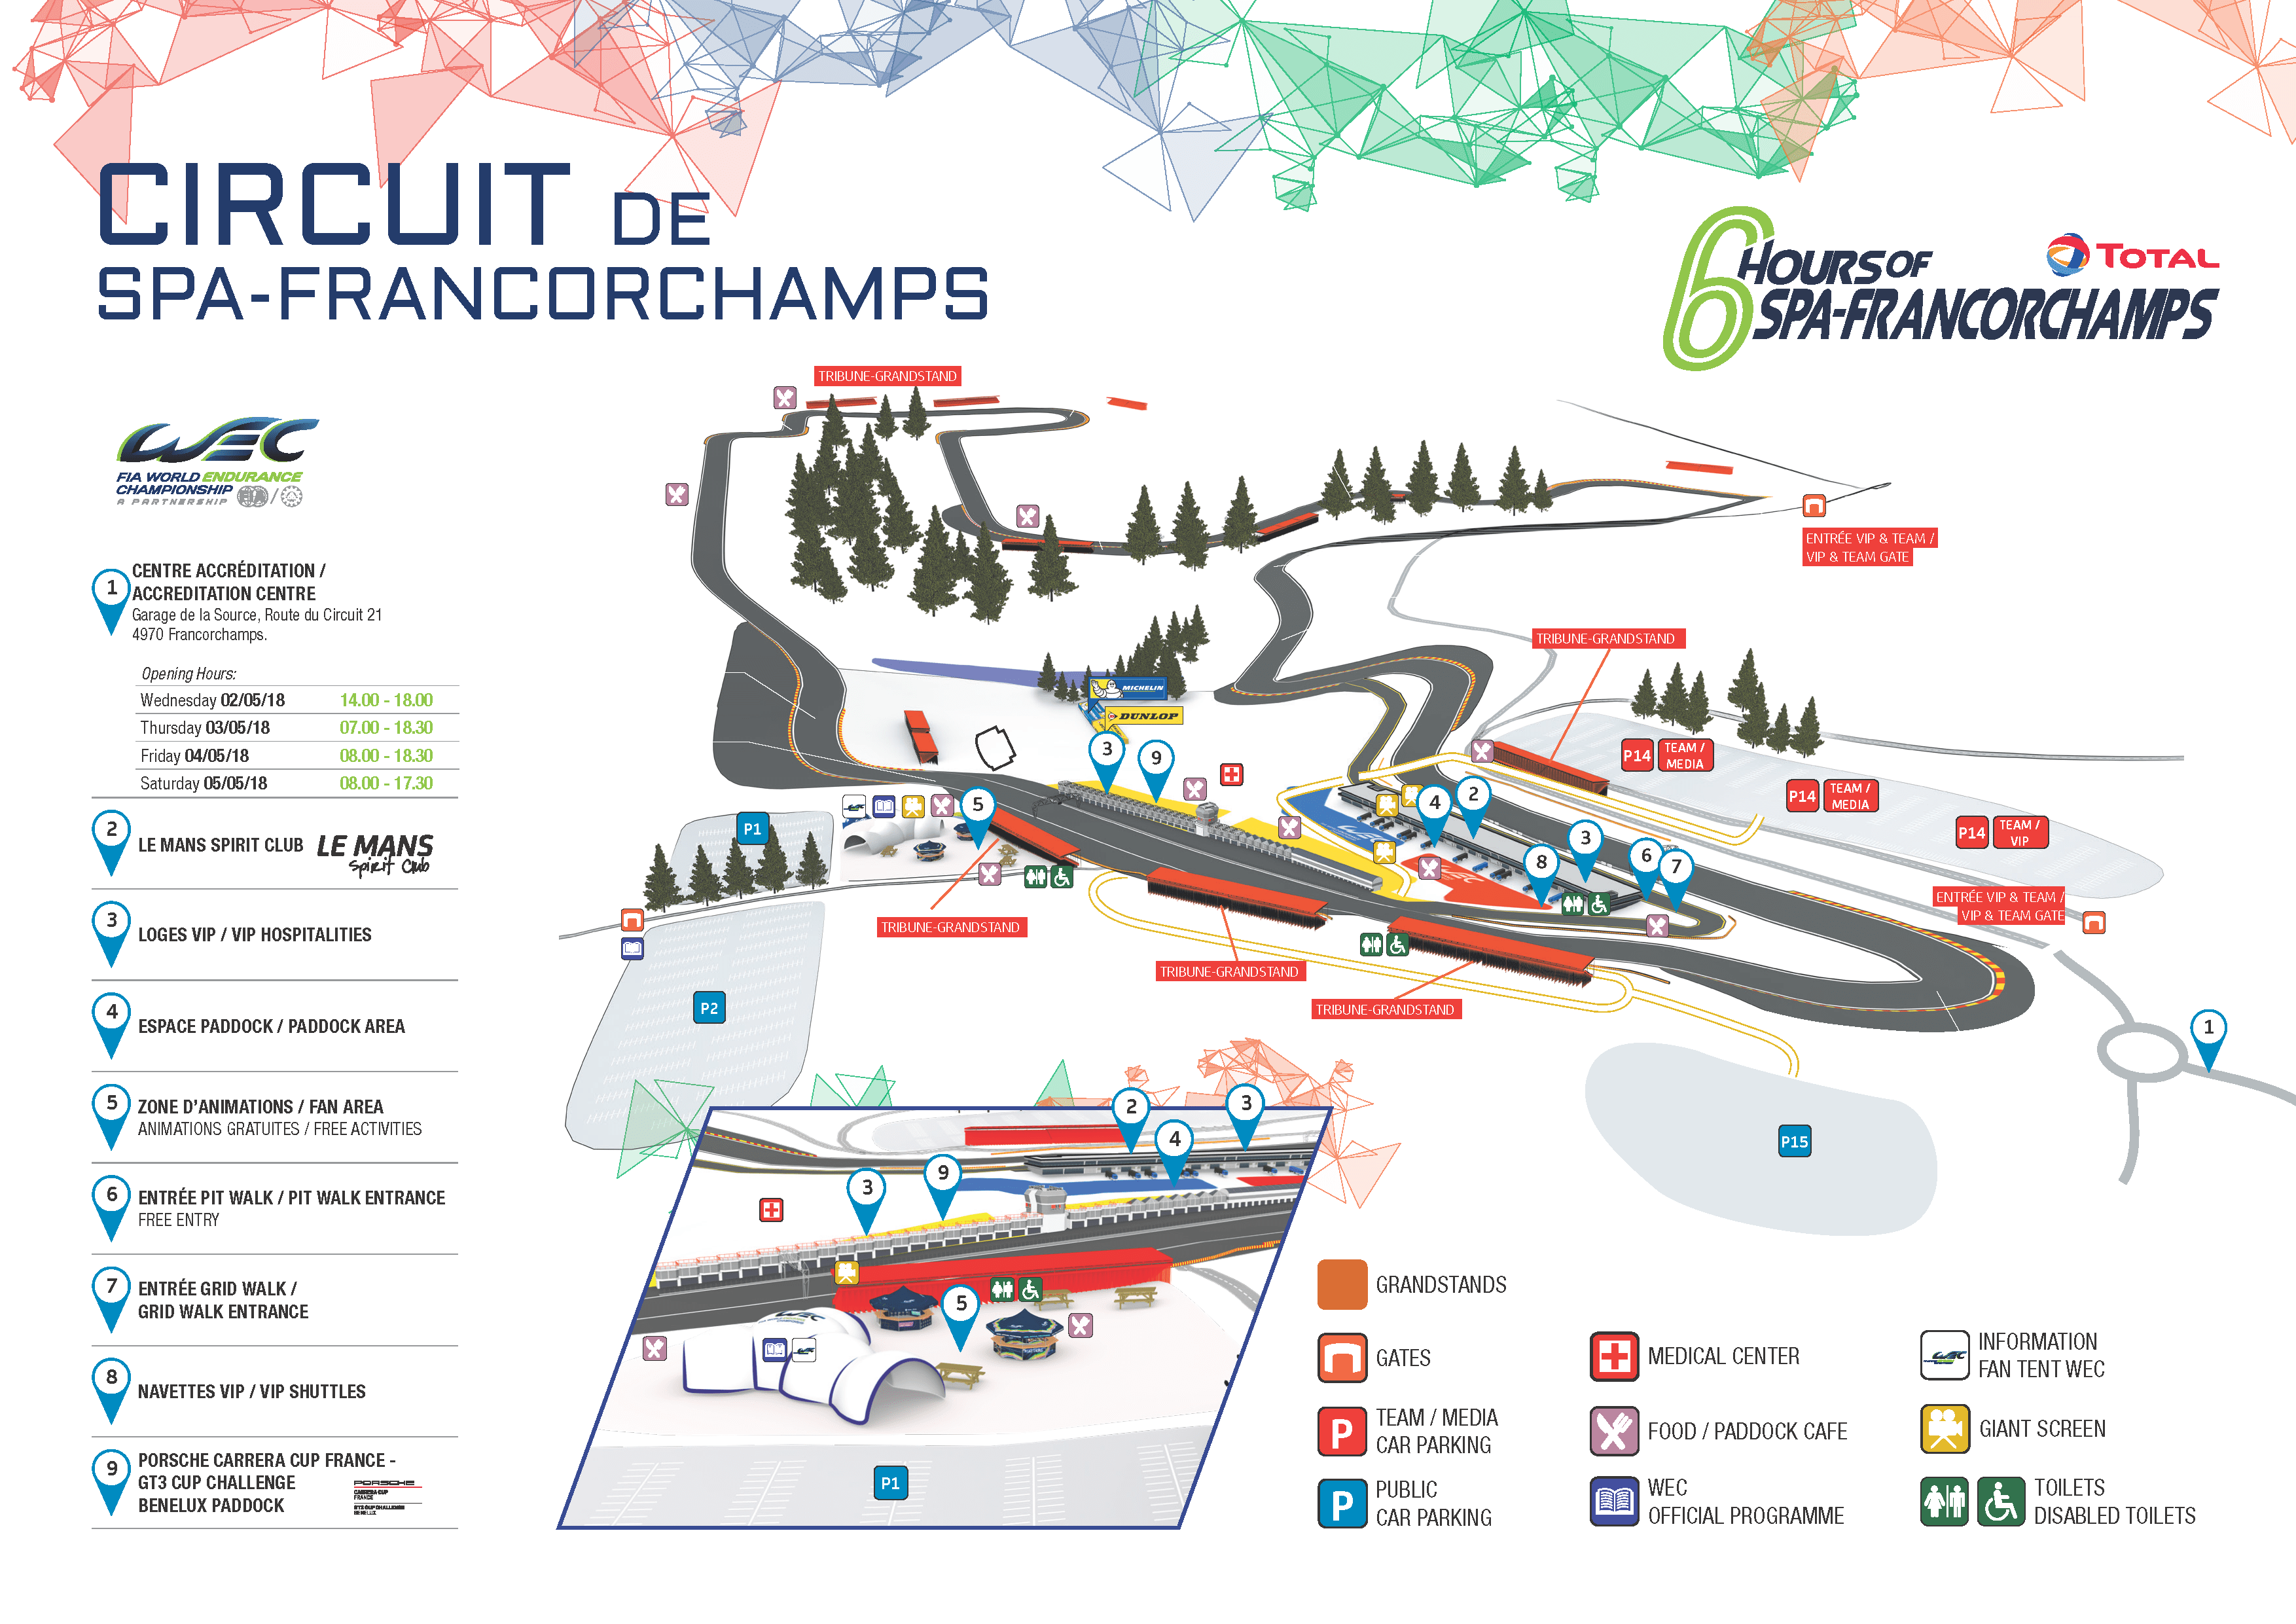 [OFFICIAL] WEC 6 Hours of Spa Francorchamps - Practice 1, 2 and 3